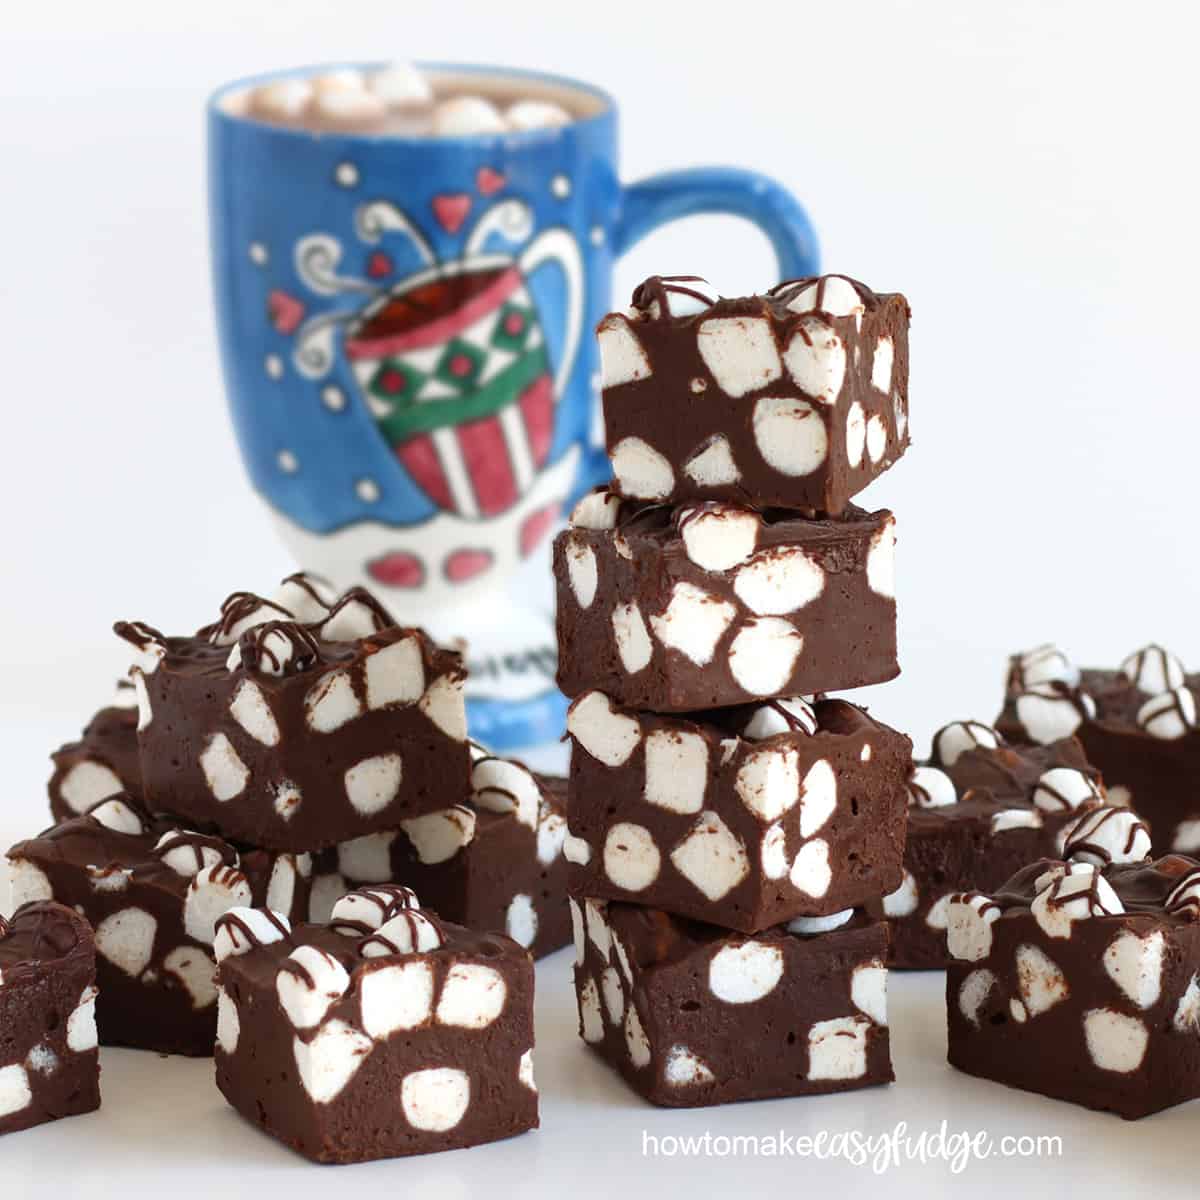 hot chocolate fudge filled with mini marshmallows arranged in front of a mug of hot cocoa.